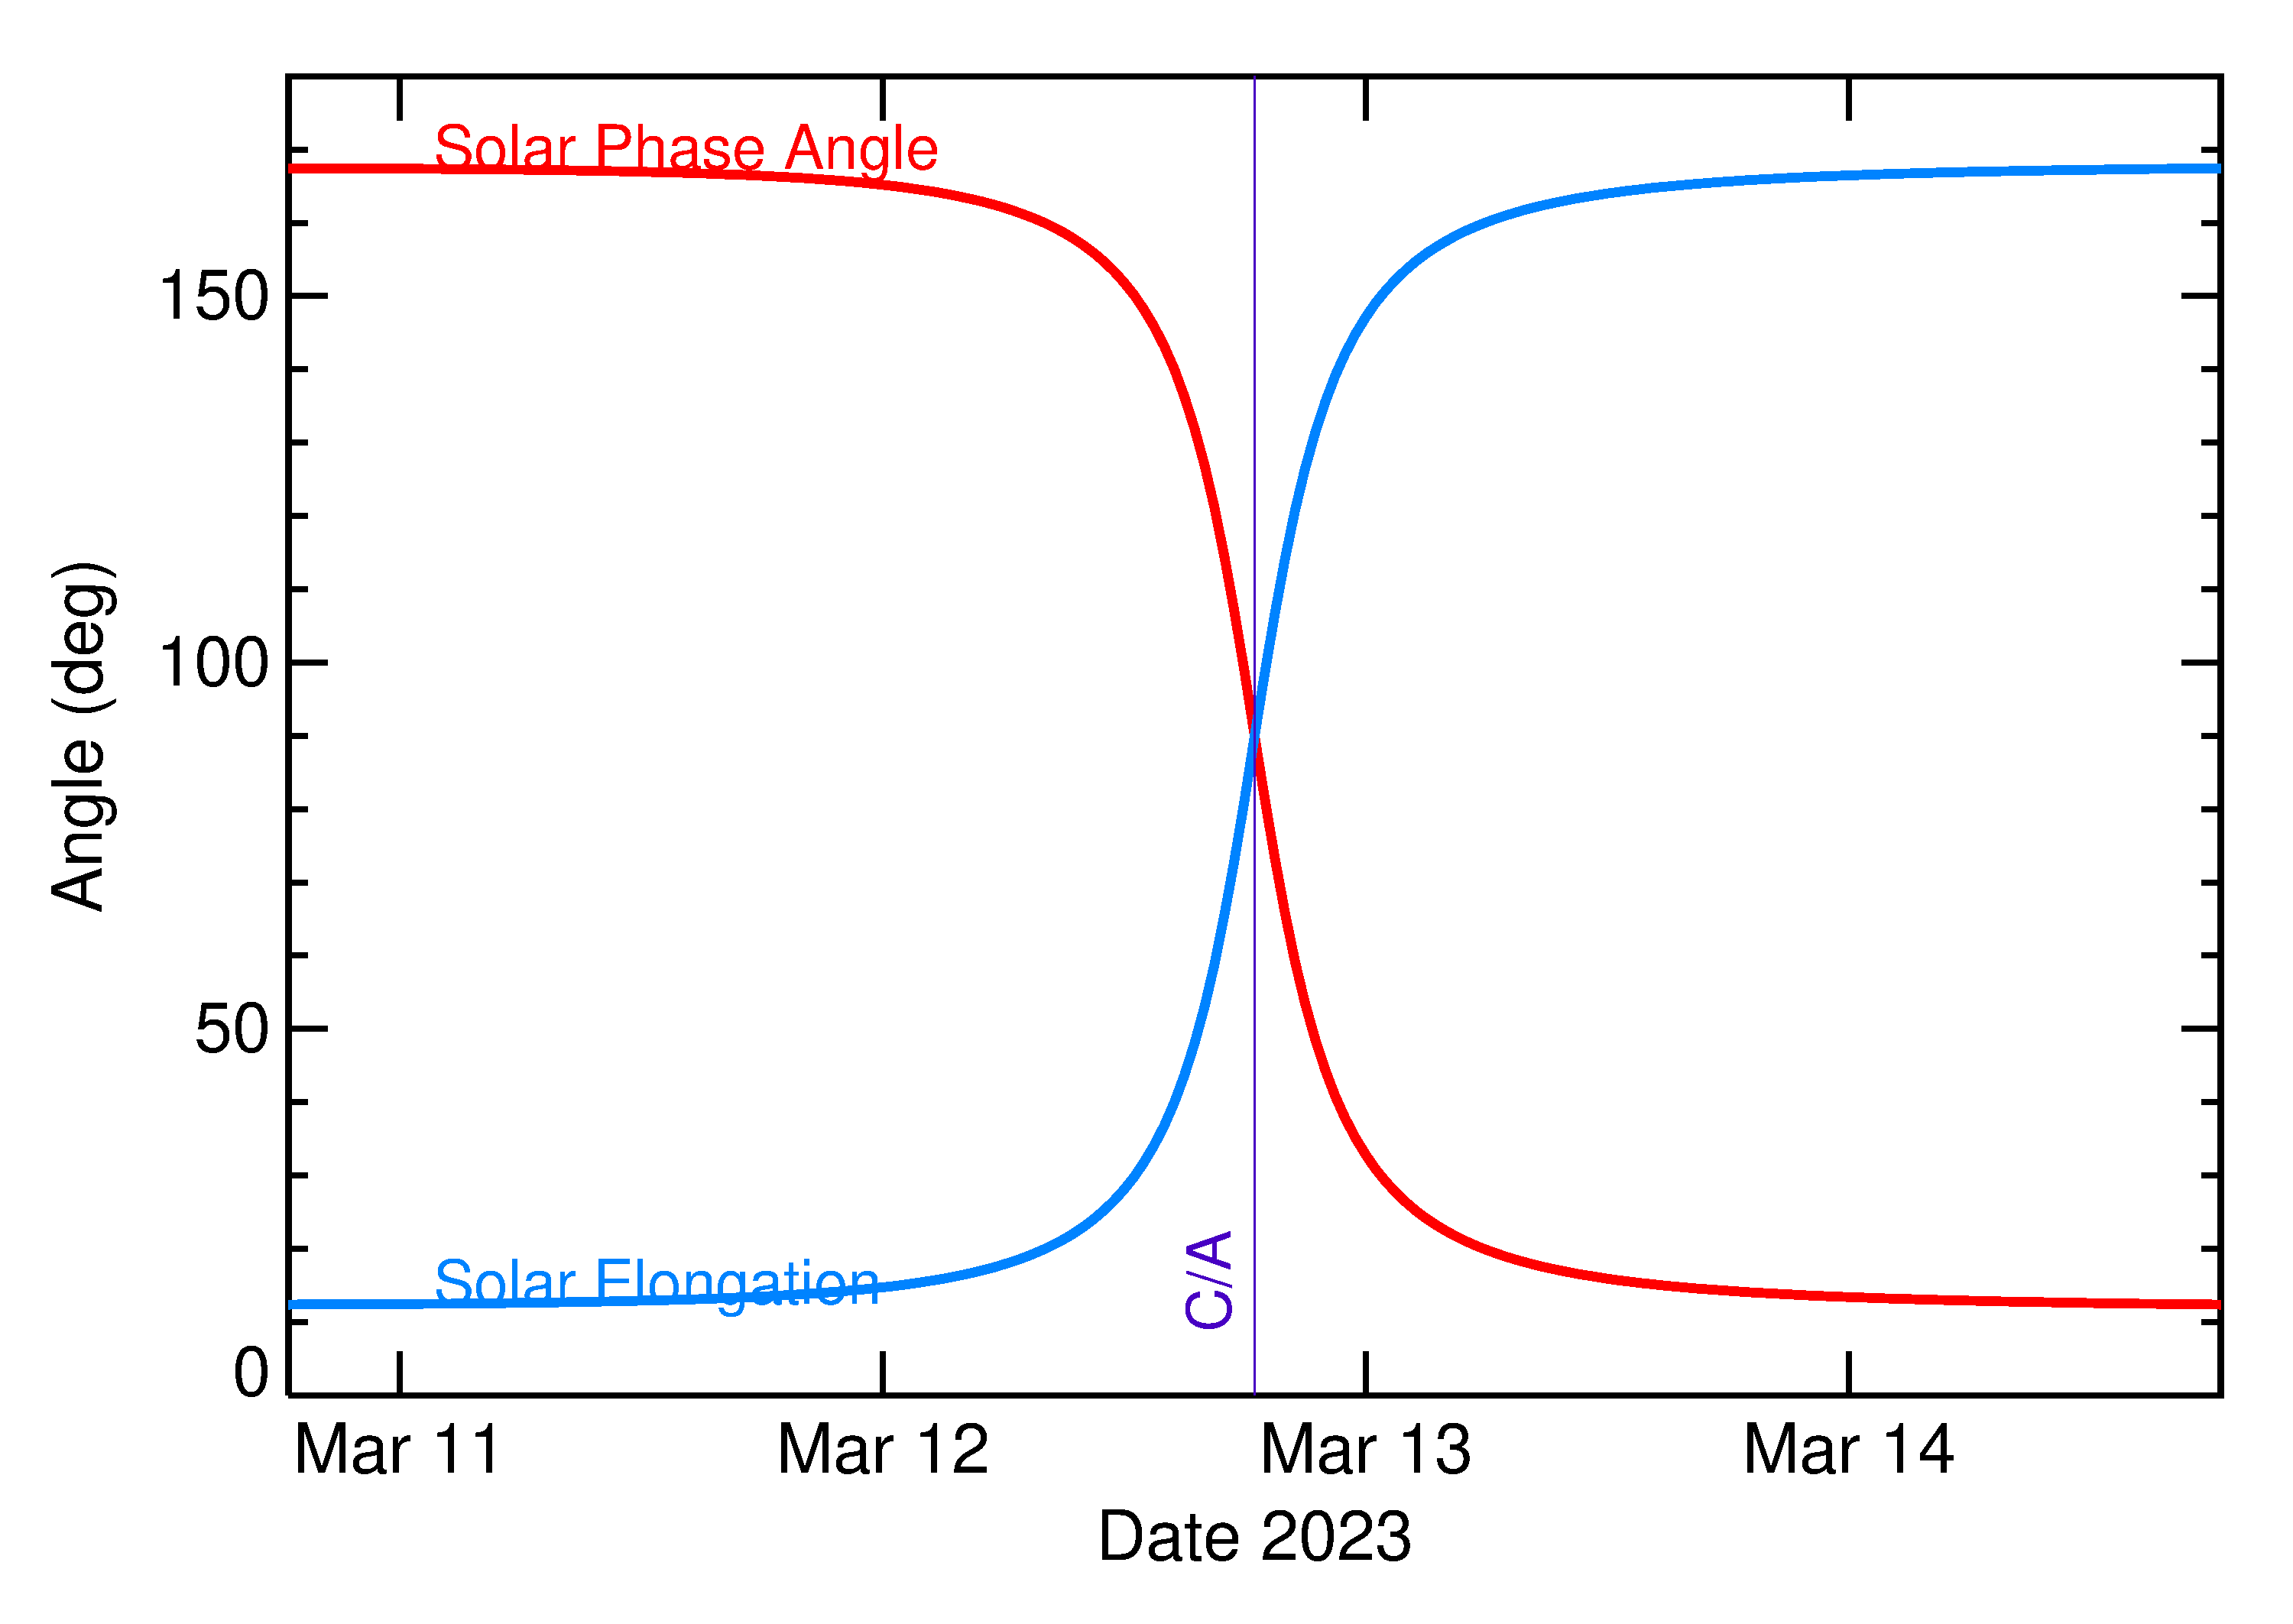 Solar Elongation and Solar Phase Angle of 2023 ET2 in the days around closest approach